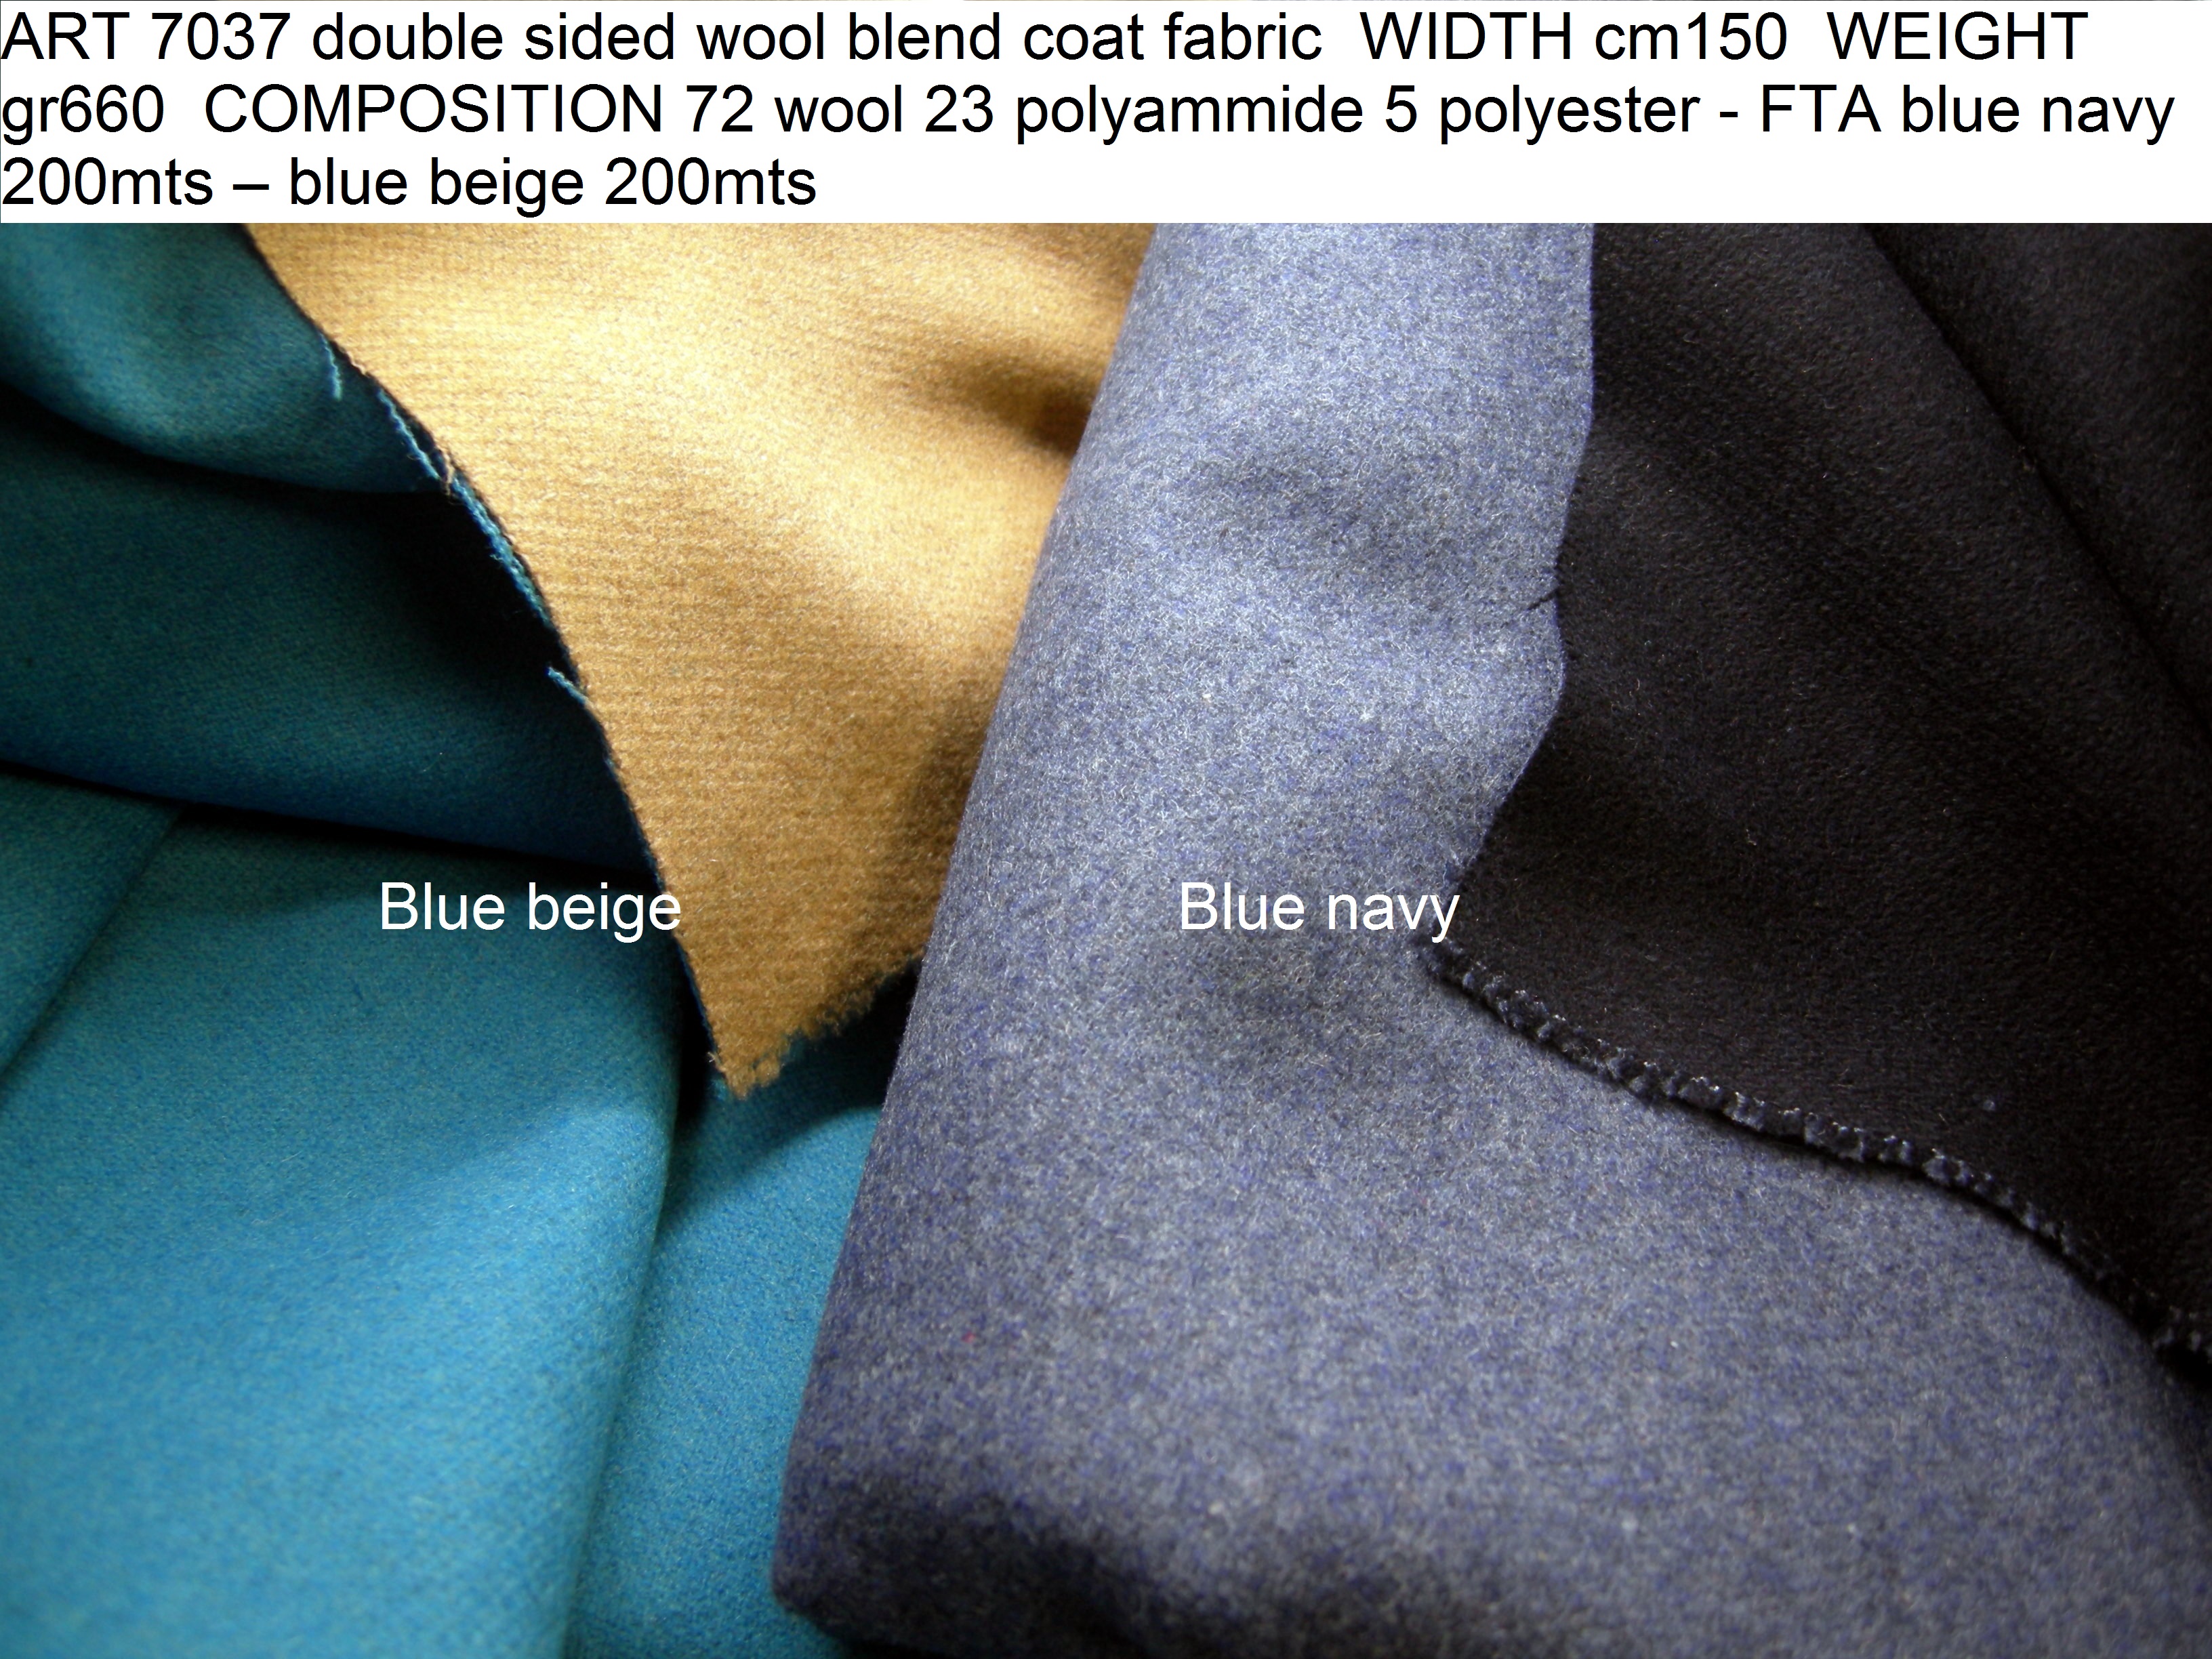 ART 7037 double sided wool blend coat fabric WIDTH cm150 WEIGHT gr660 COMPOSITION 72 wool 23 polyammide 5 polyester - FTA blue navy 200mts – blue beige 200mts